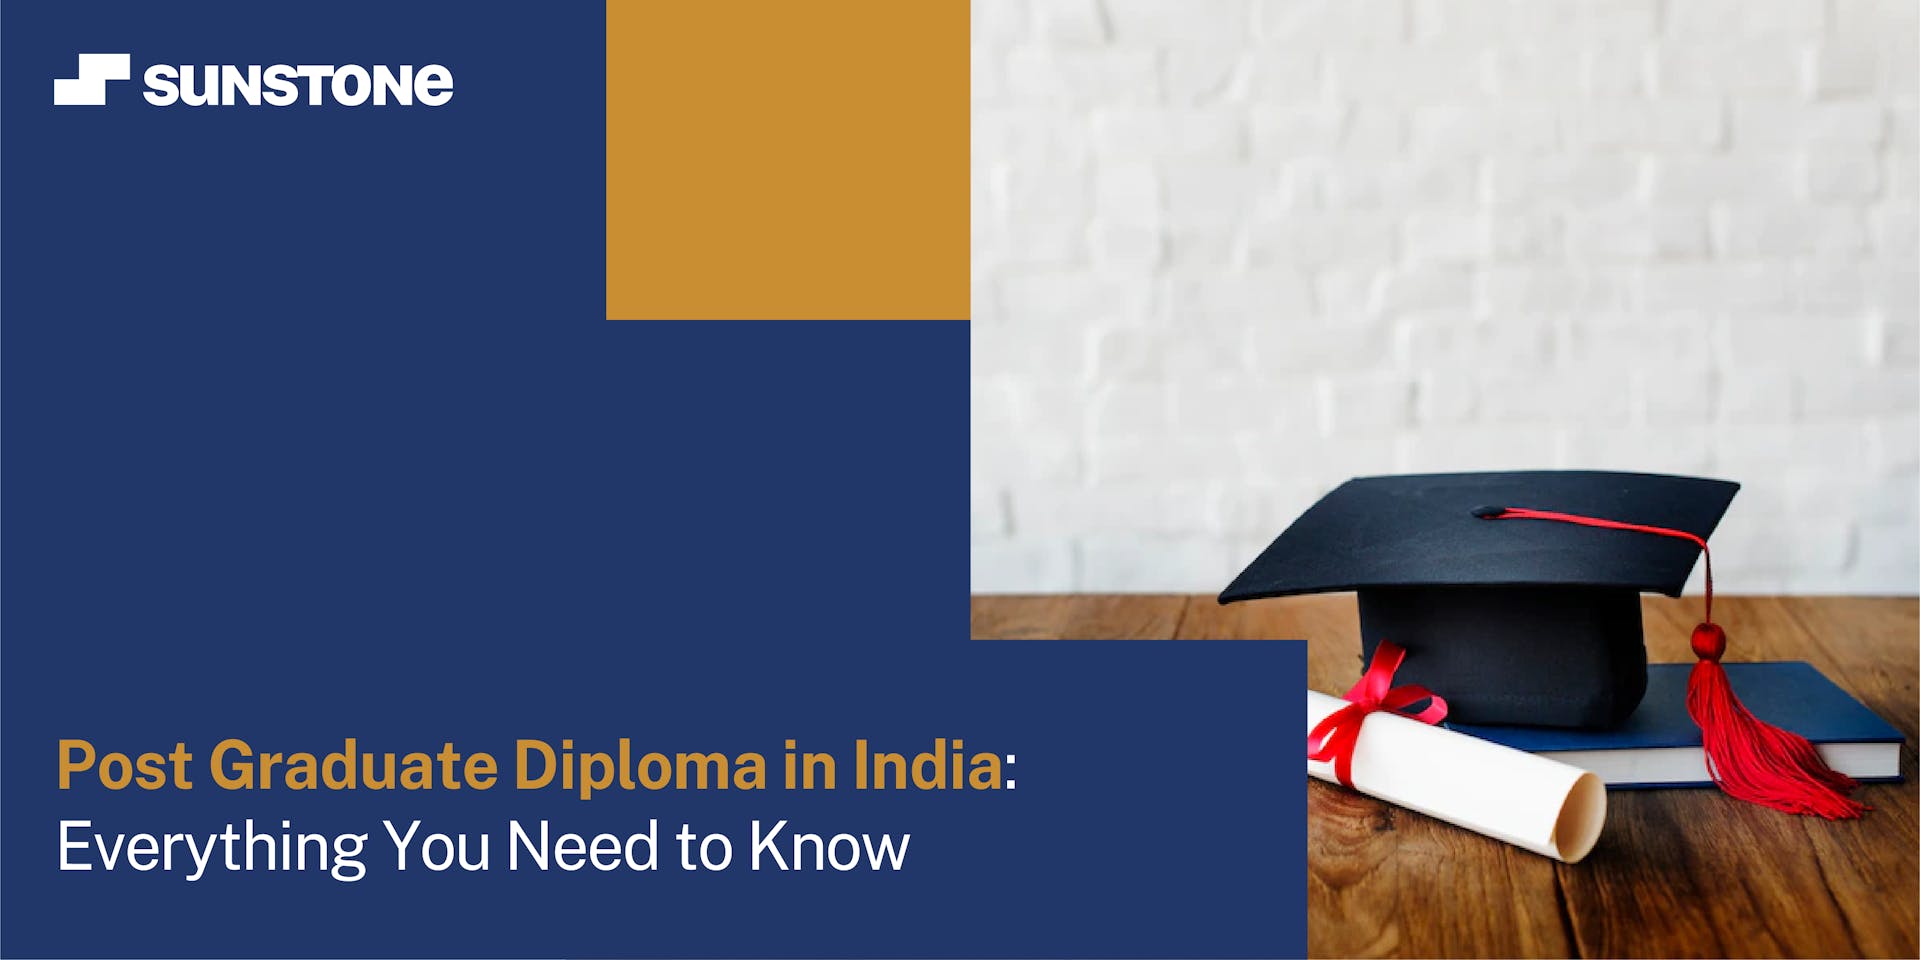 Postgraduate Diploma in India: Everything you need to know